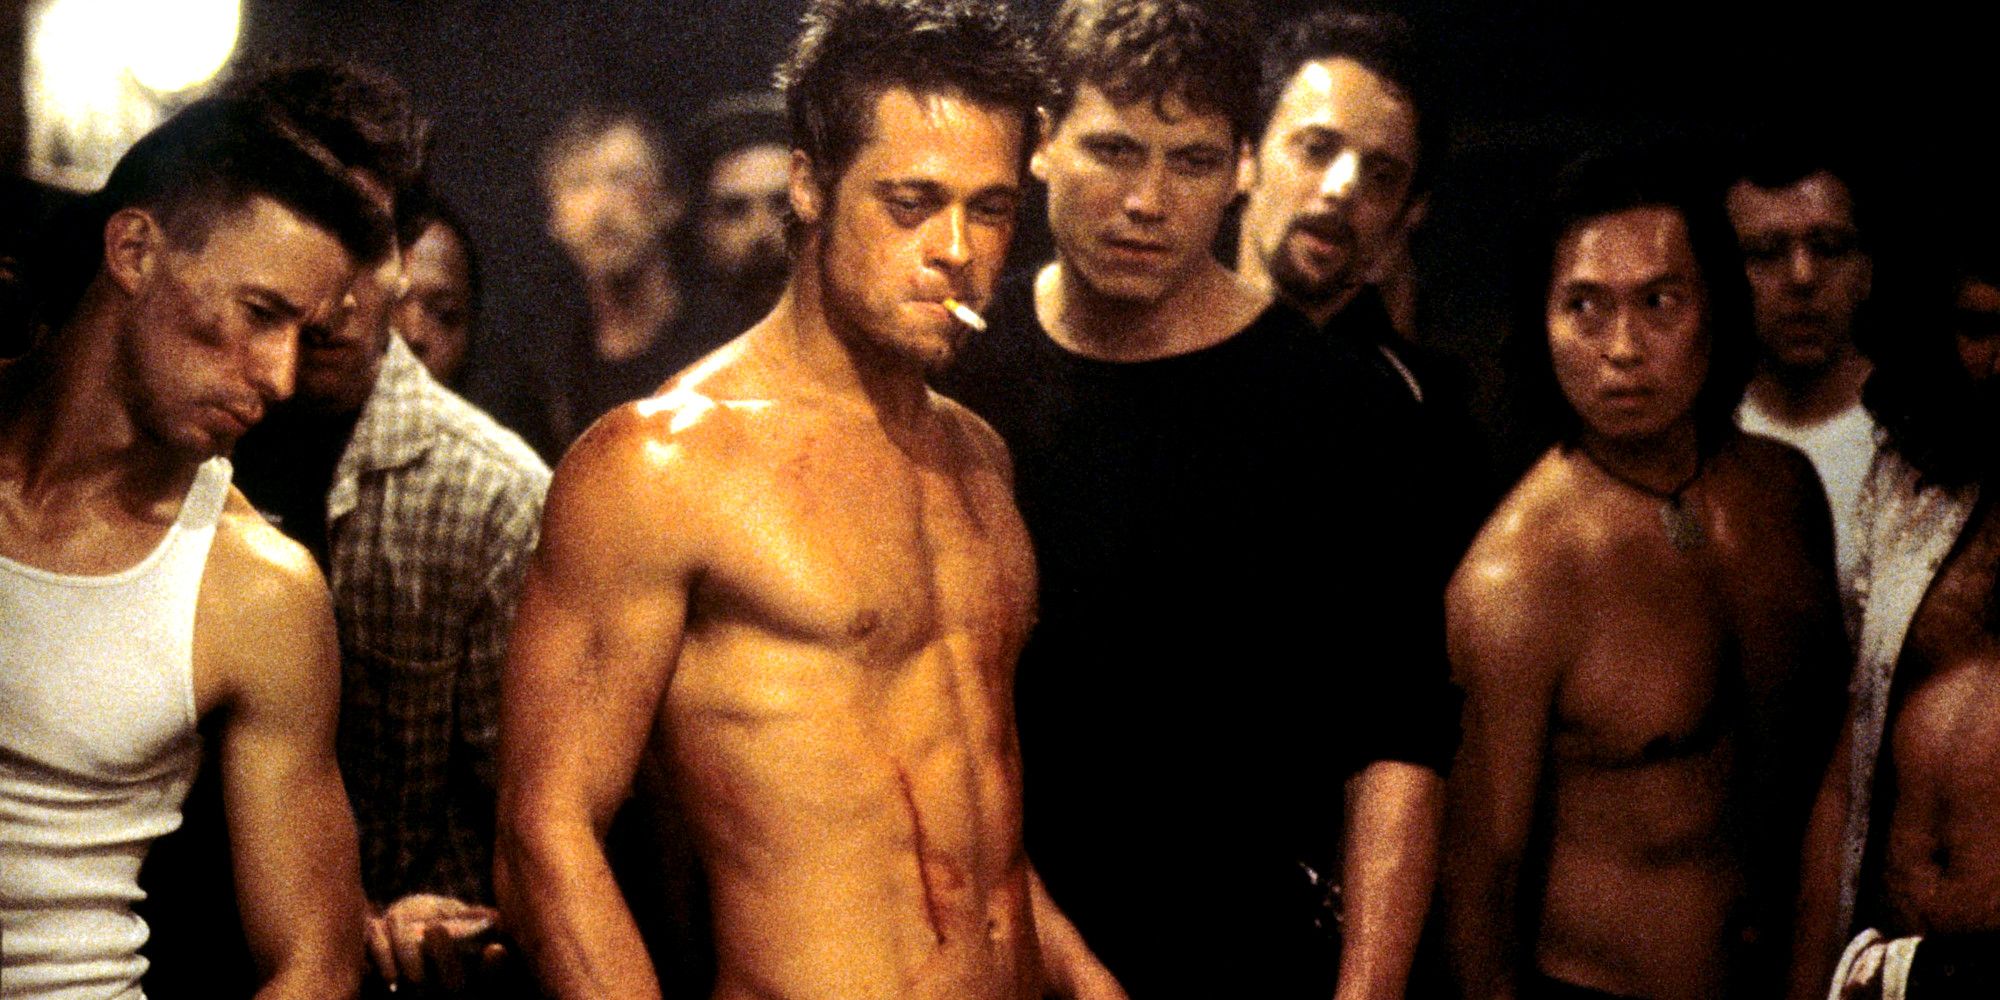 Fight Club Original Ending Restored In China After Censorship